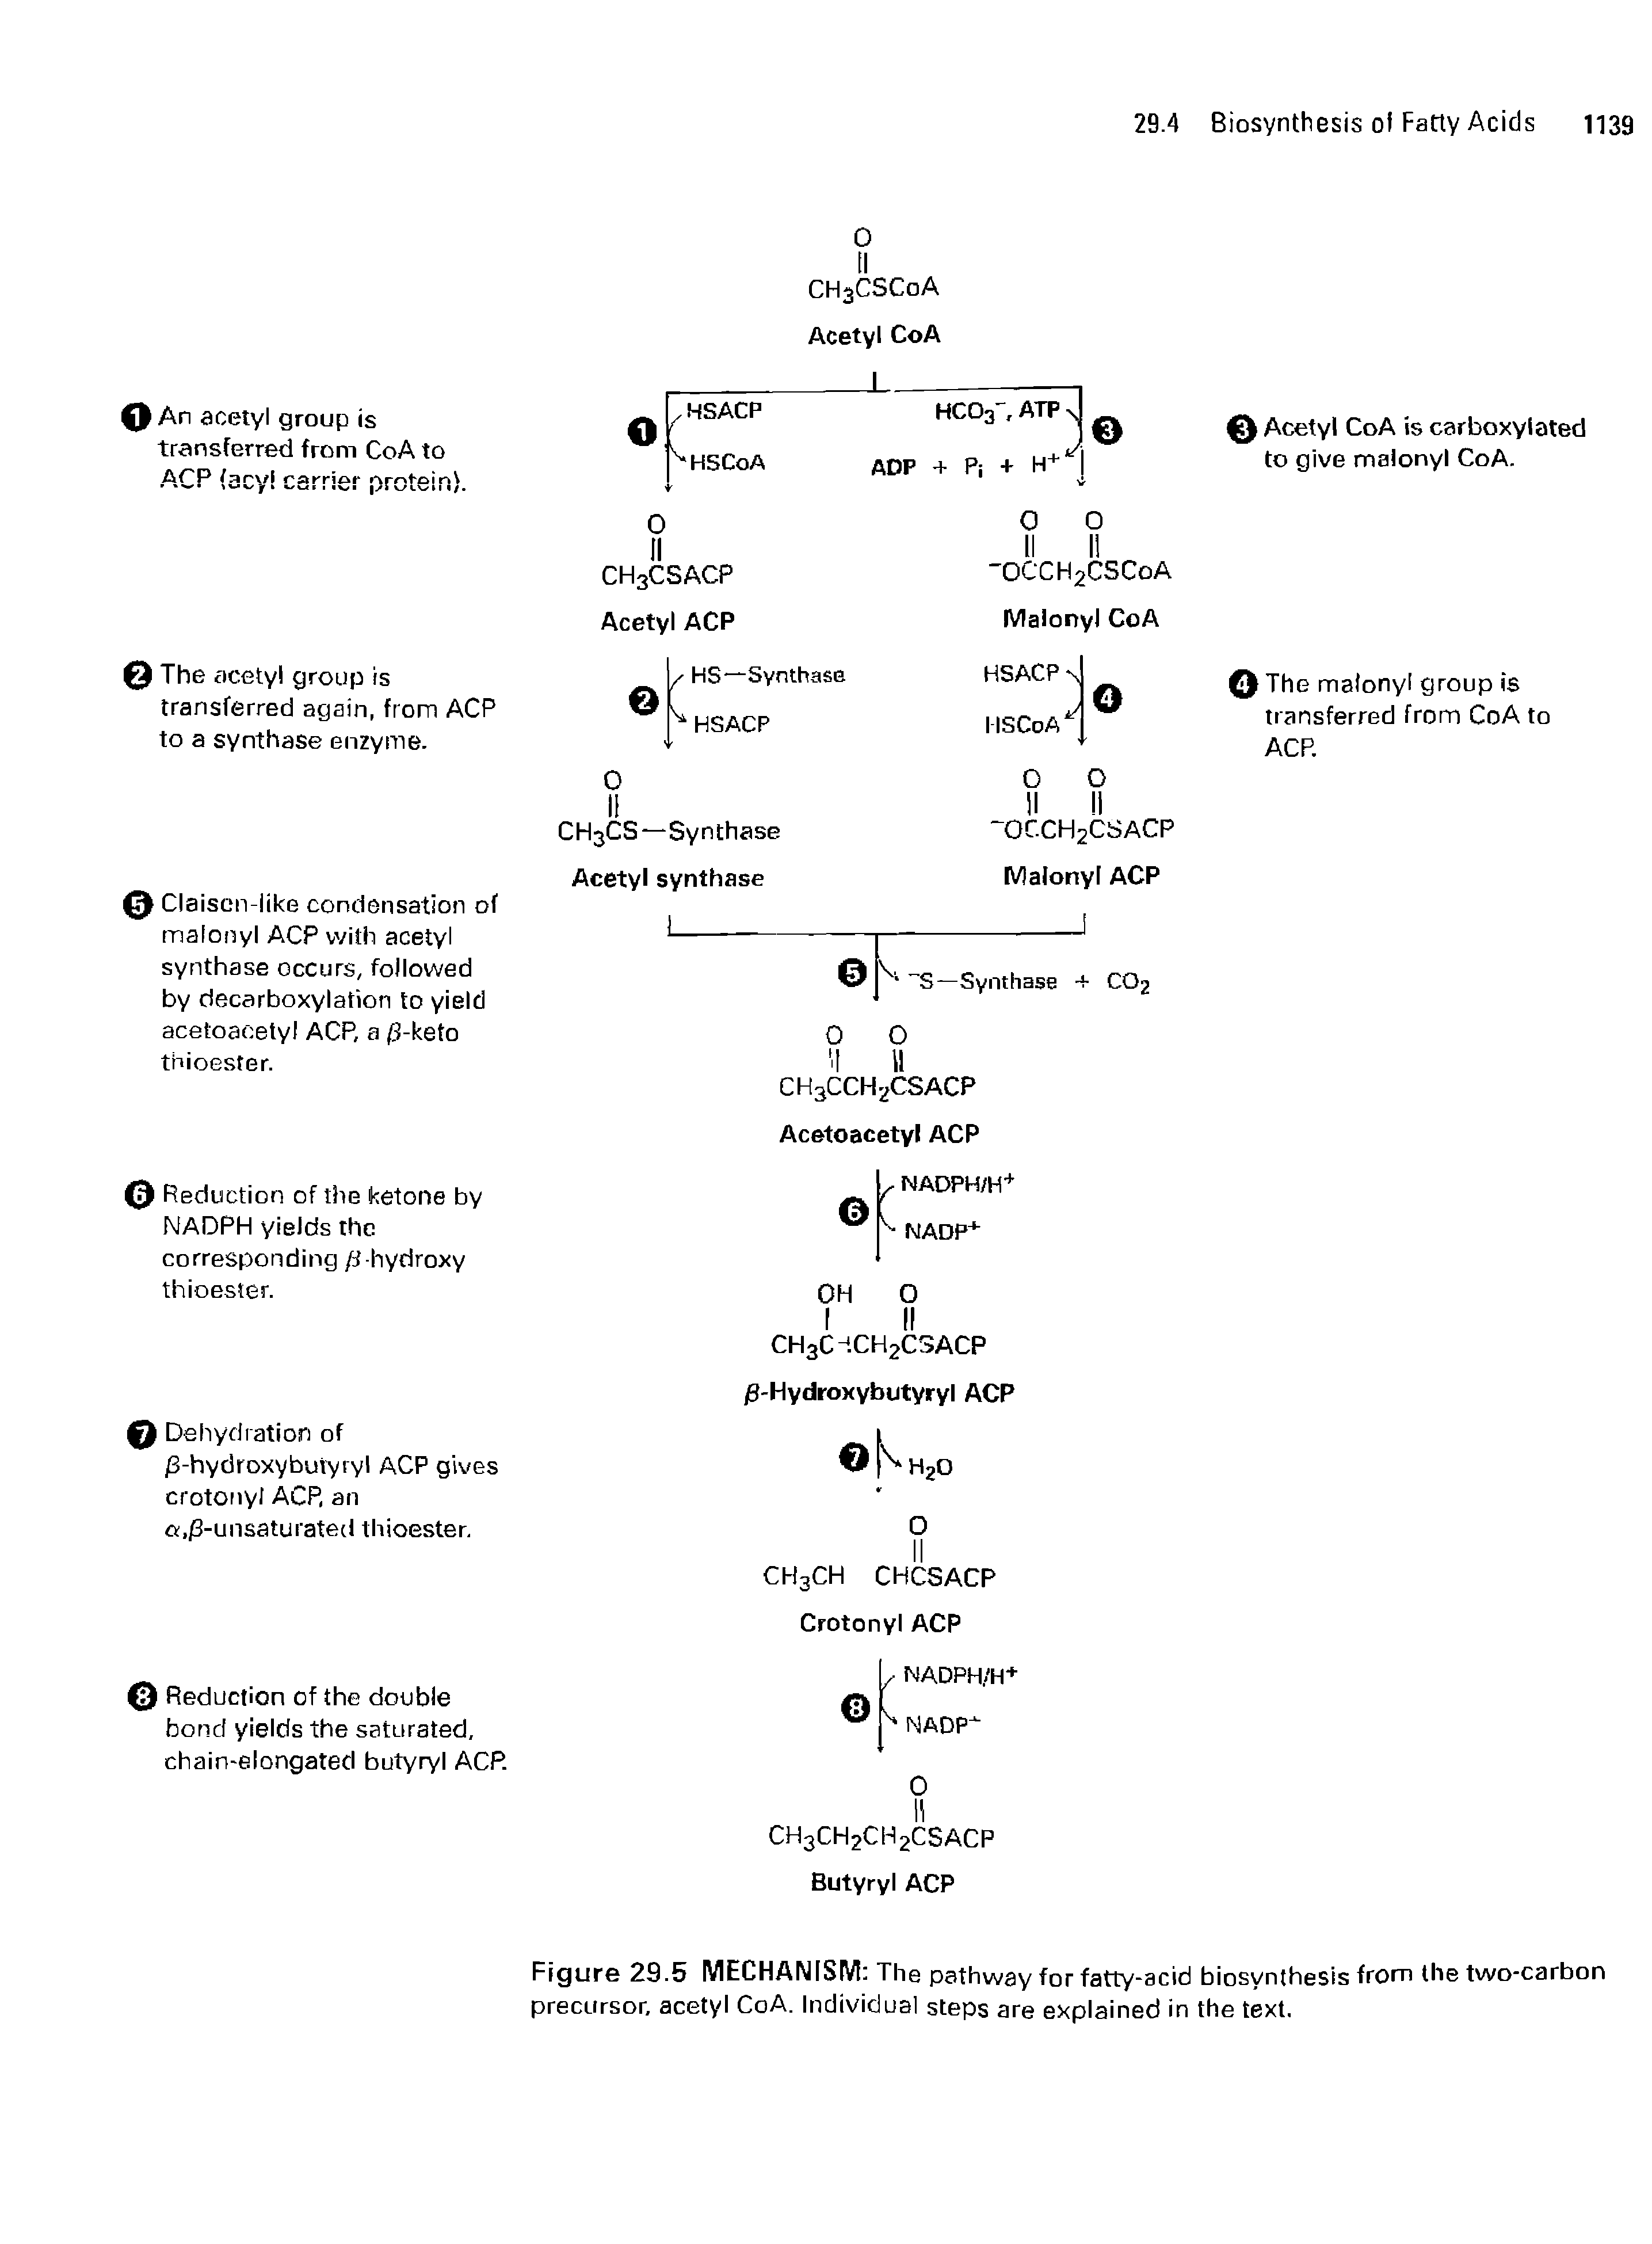 Figure 29.5 MECHANISM The pathway for fatty-acid biosynthesis from the two-carbon precursor, acetyl CoA. Individual steps are explained in the text.